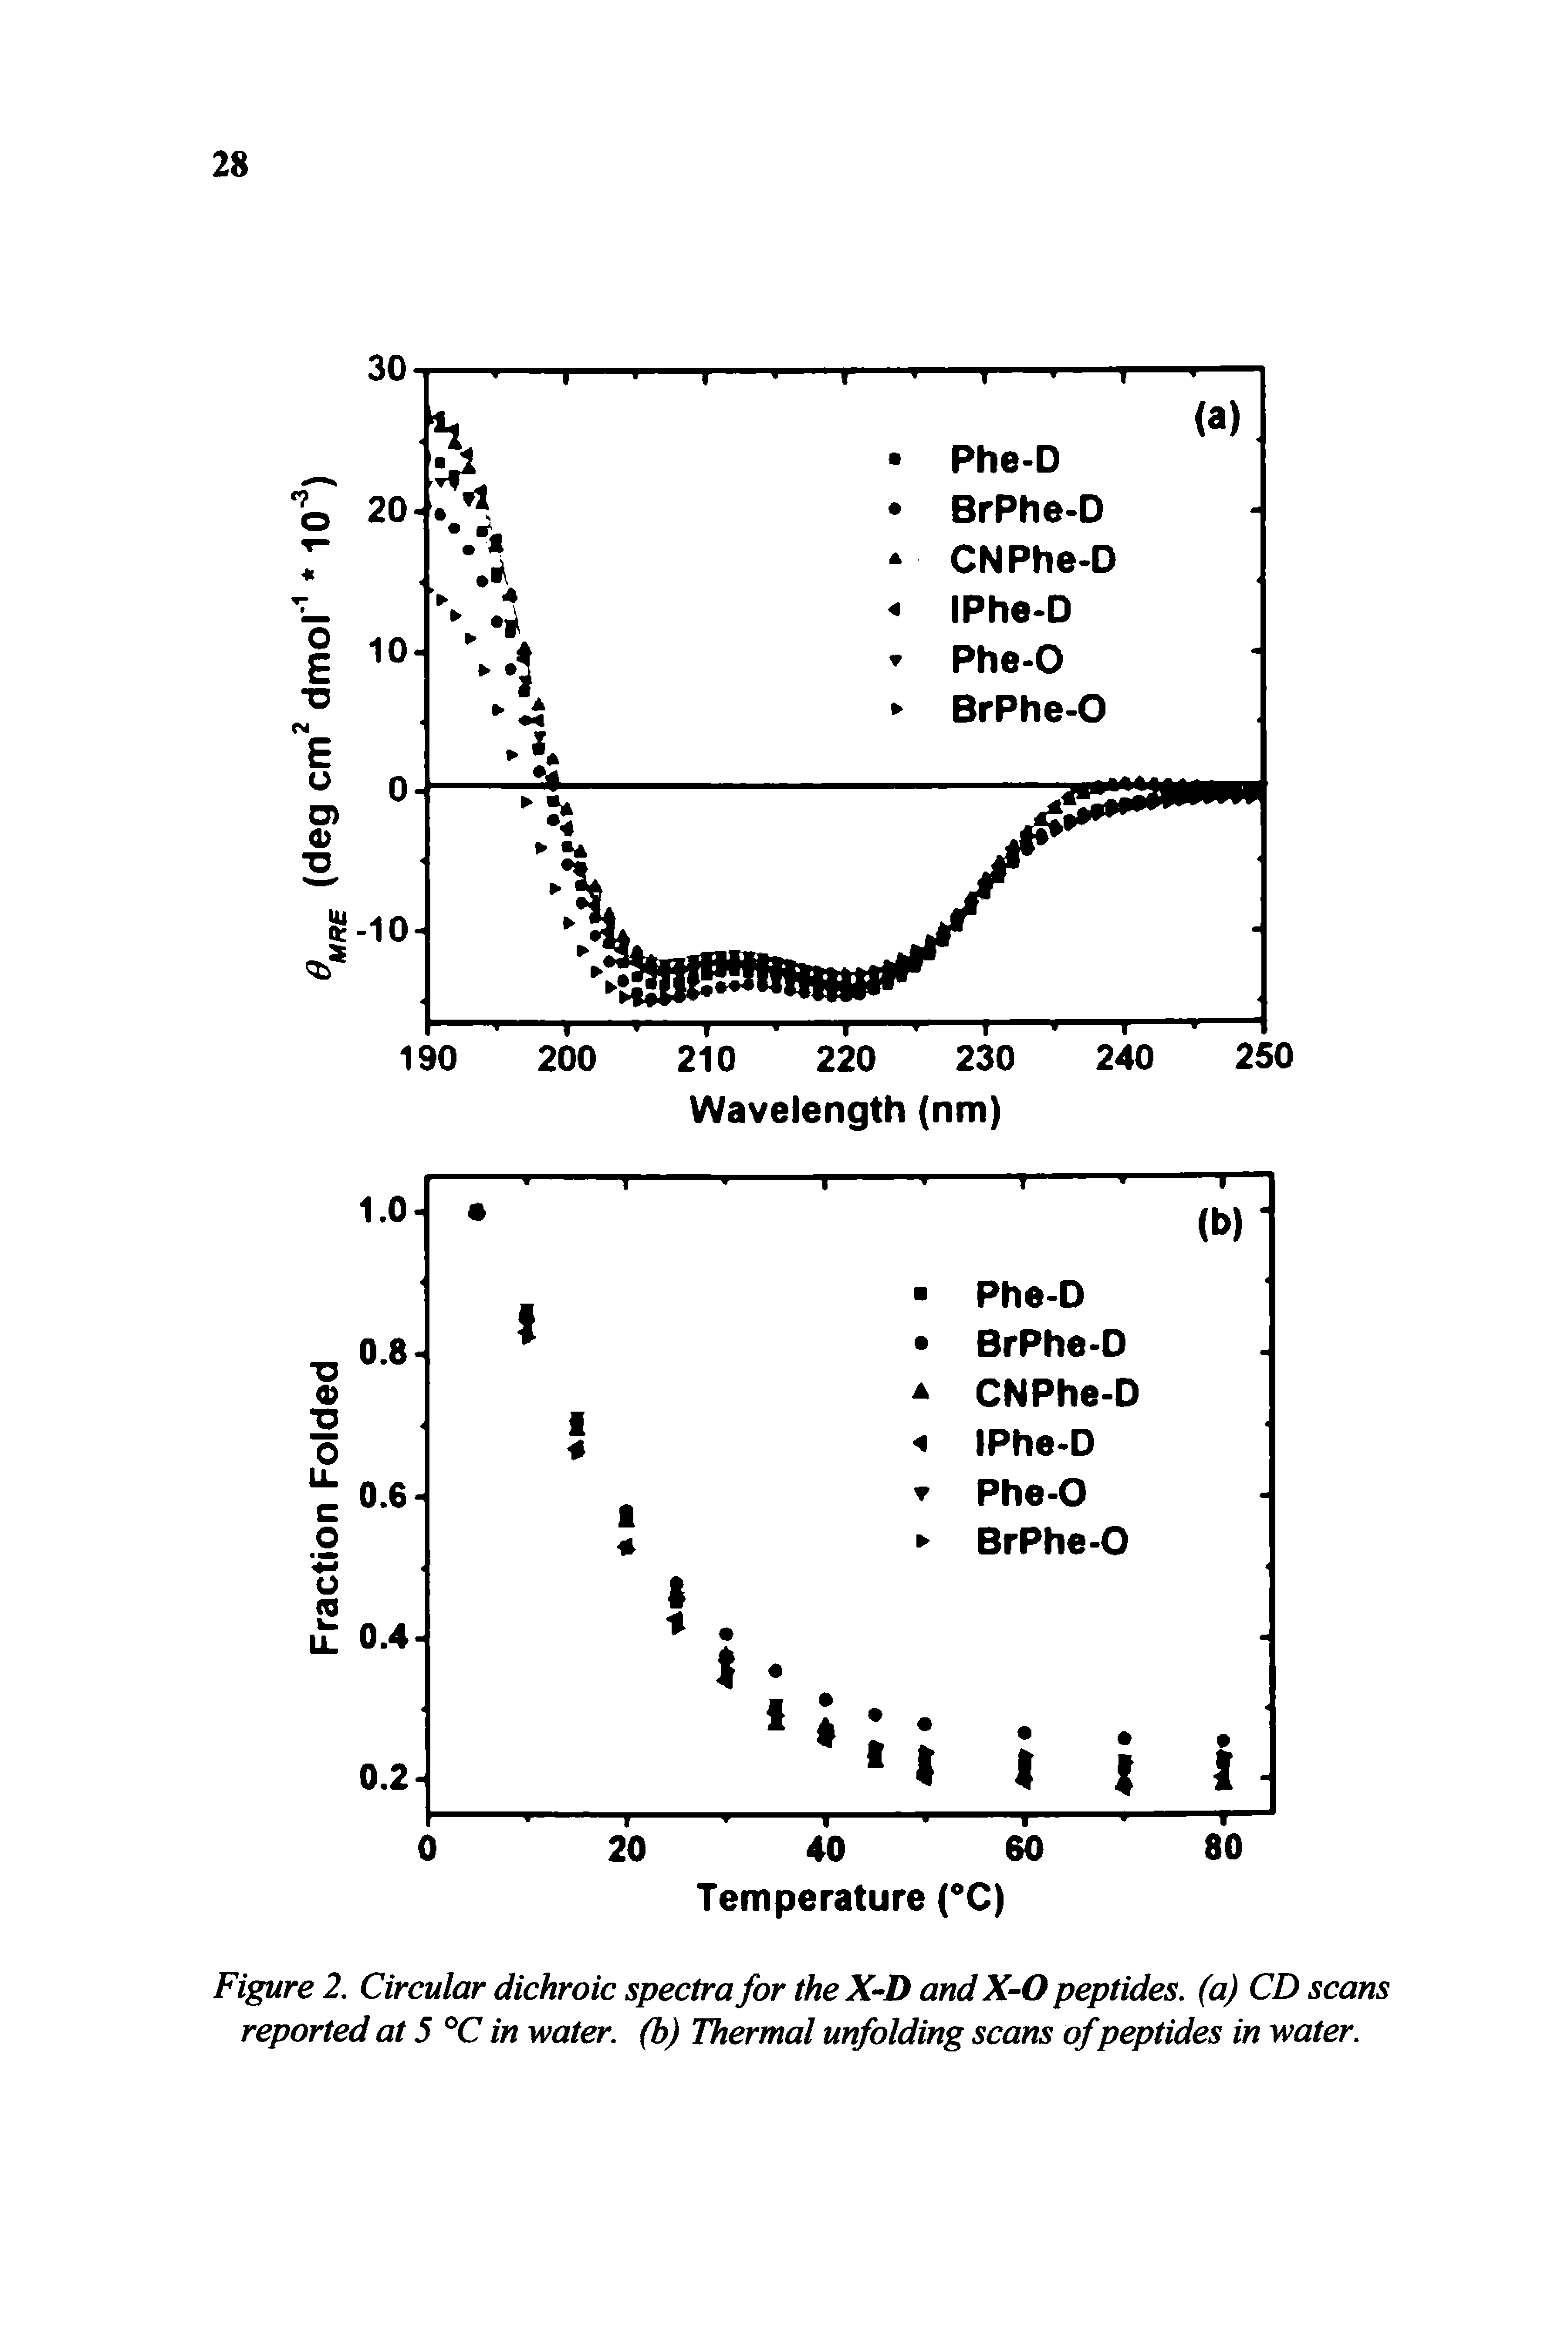 Figure 2. Circular dichroic spectra for the X-D and X-O peptides, (a) CD scans reported at 5 °C in water, (b) Thermal unfolding scans of peptides in water.